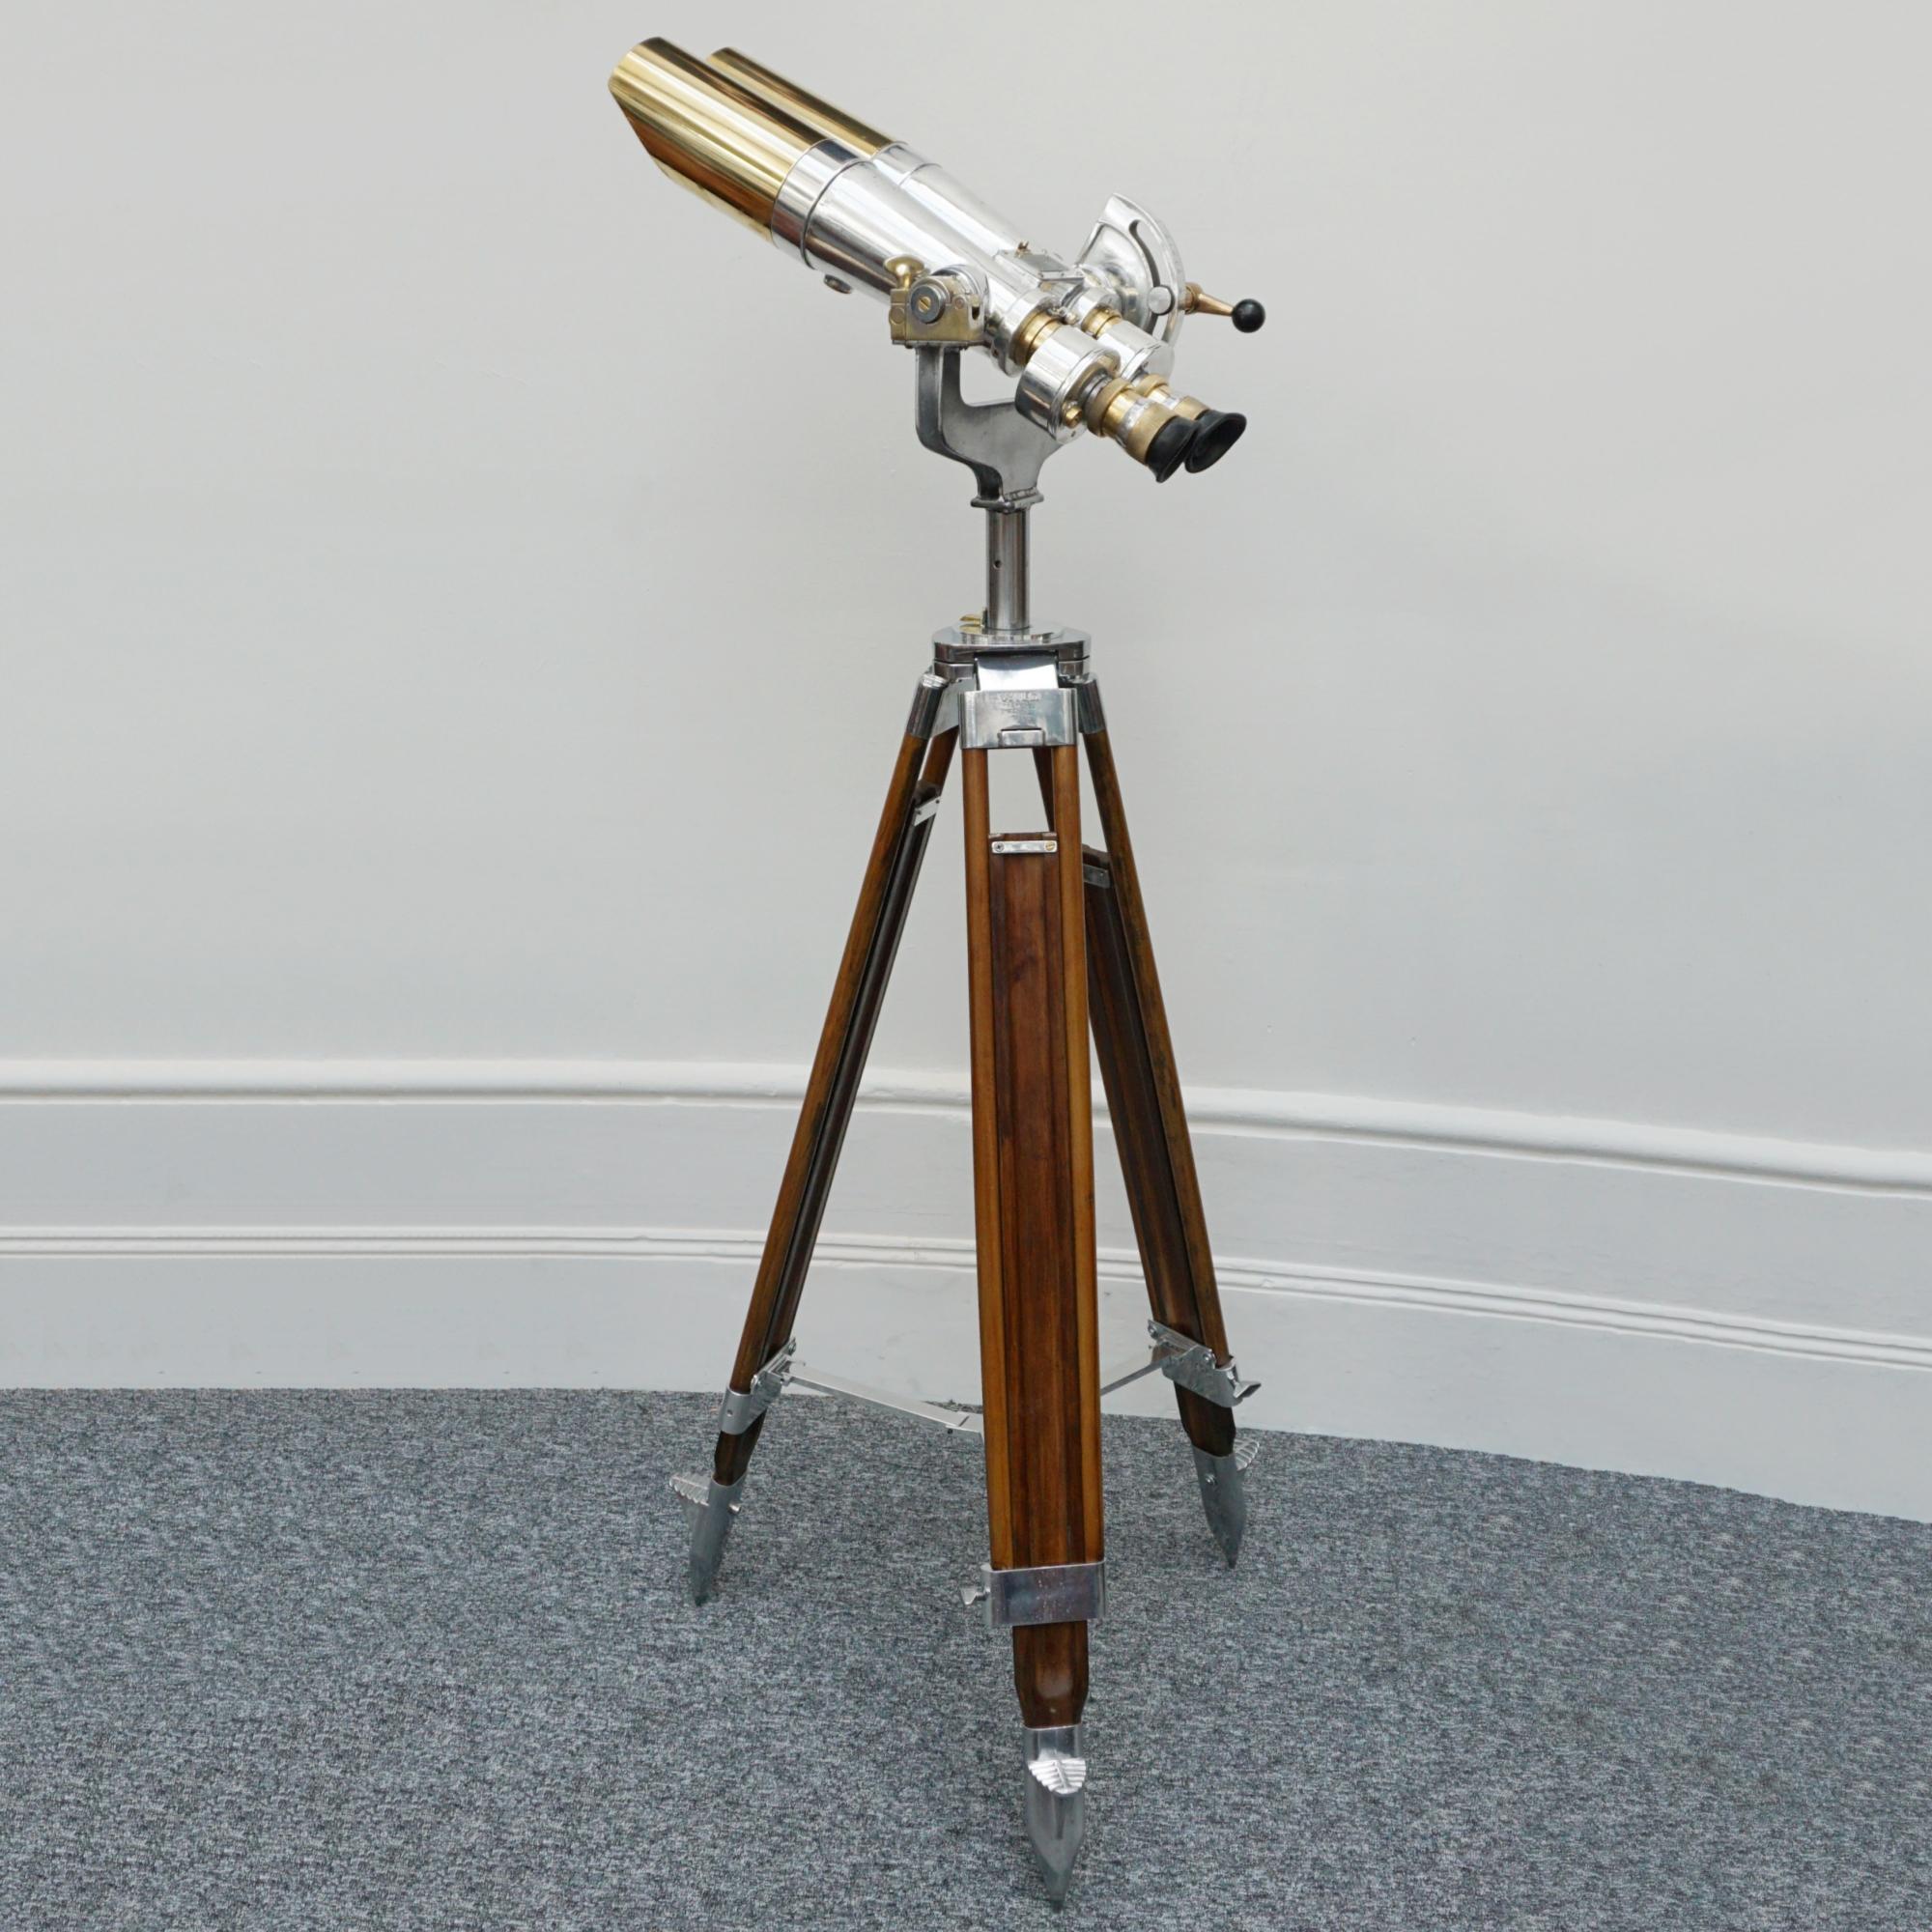 Early Fuji Meibo 15X80 chrome and brass marine binoculars on later extending wood and chromed metal stand with chromed conical feet. 15X magnification with 80mm objective lens. 

Dimensions: H from stand 30cm W 36cm Length 63cm Stand H 100cm - 180cm